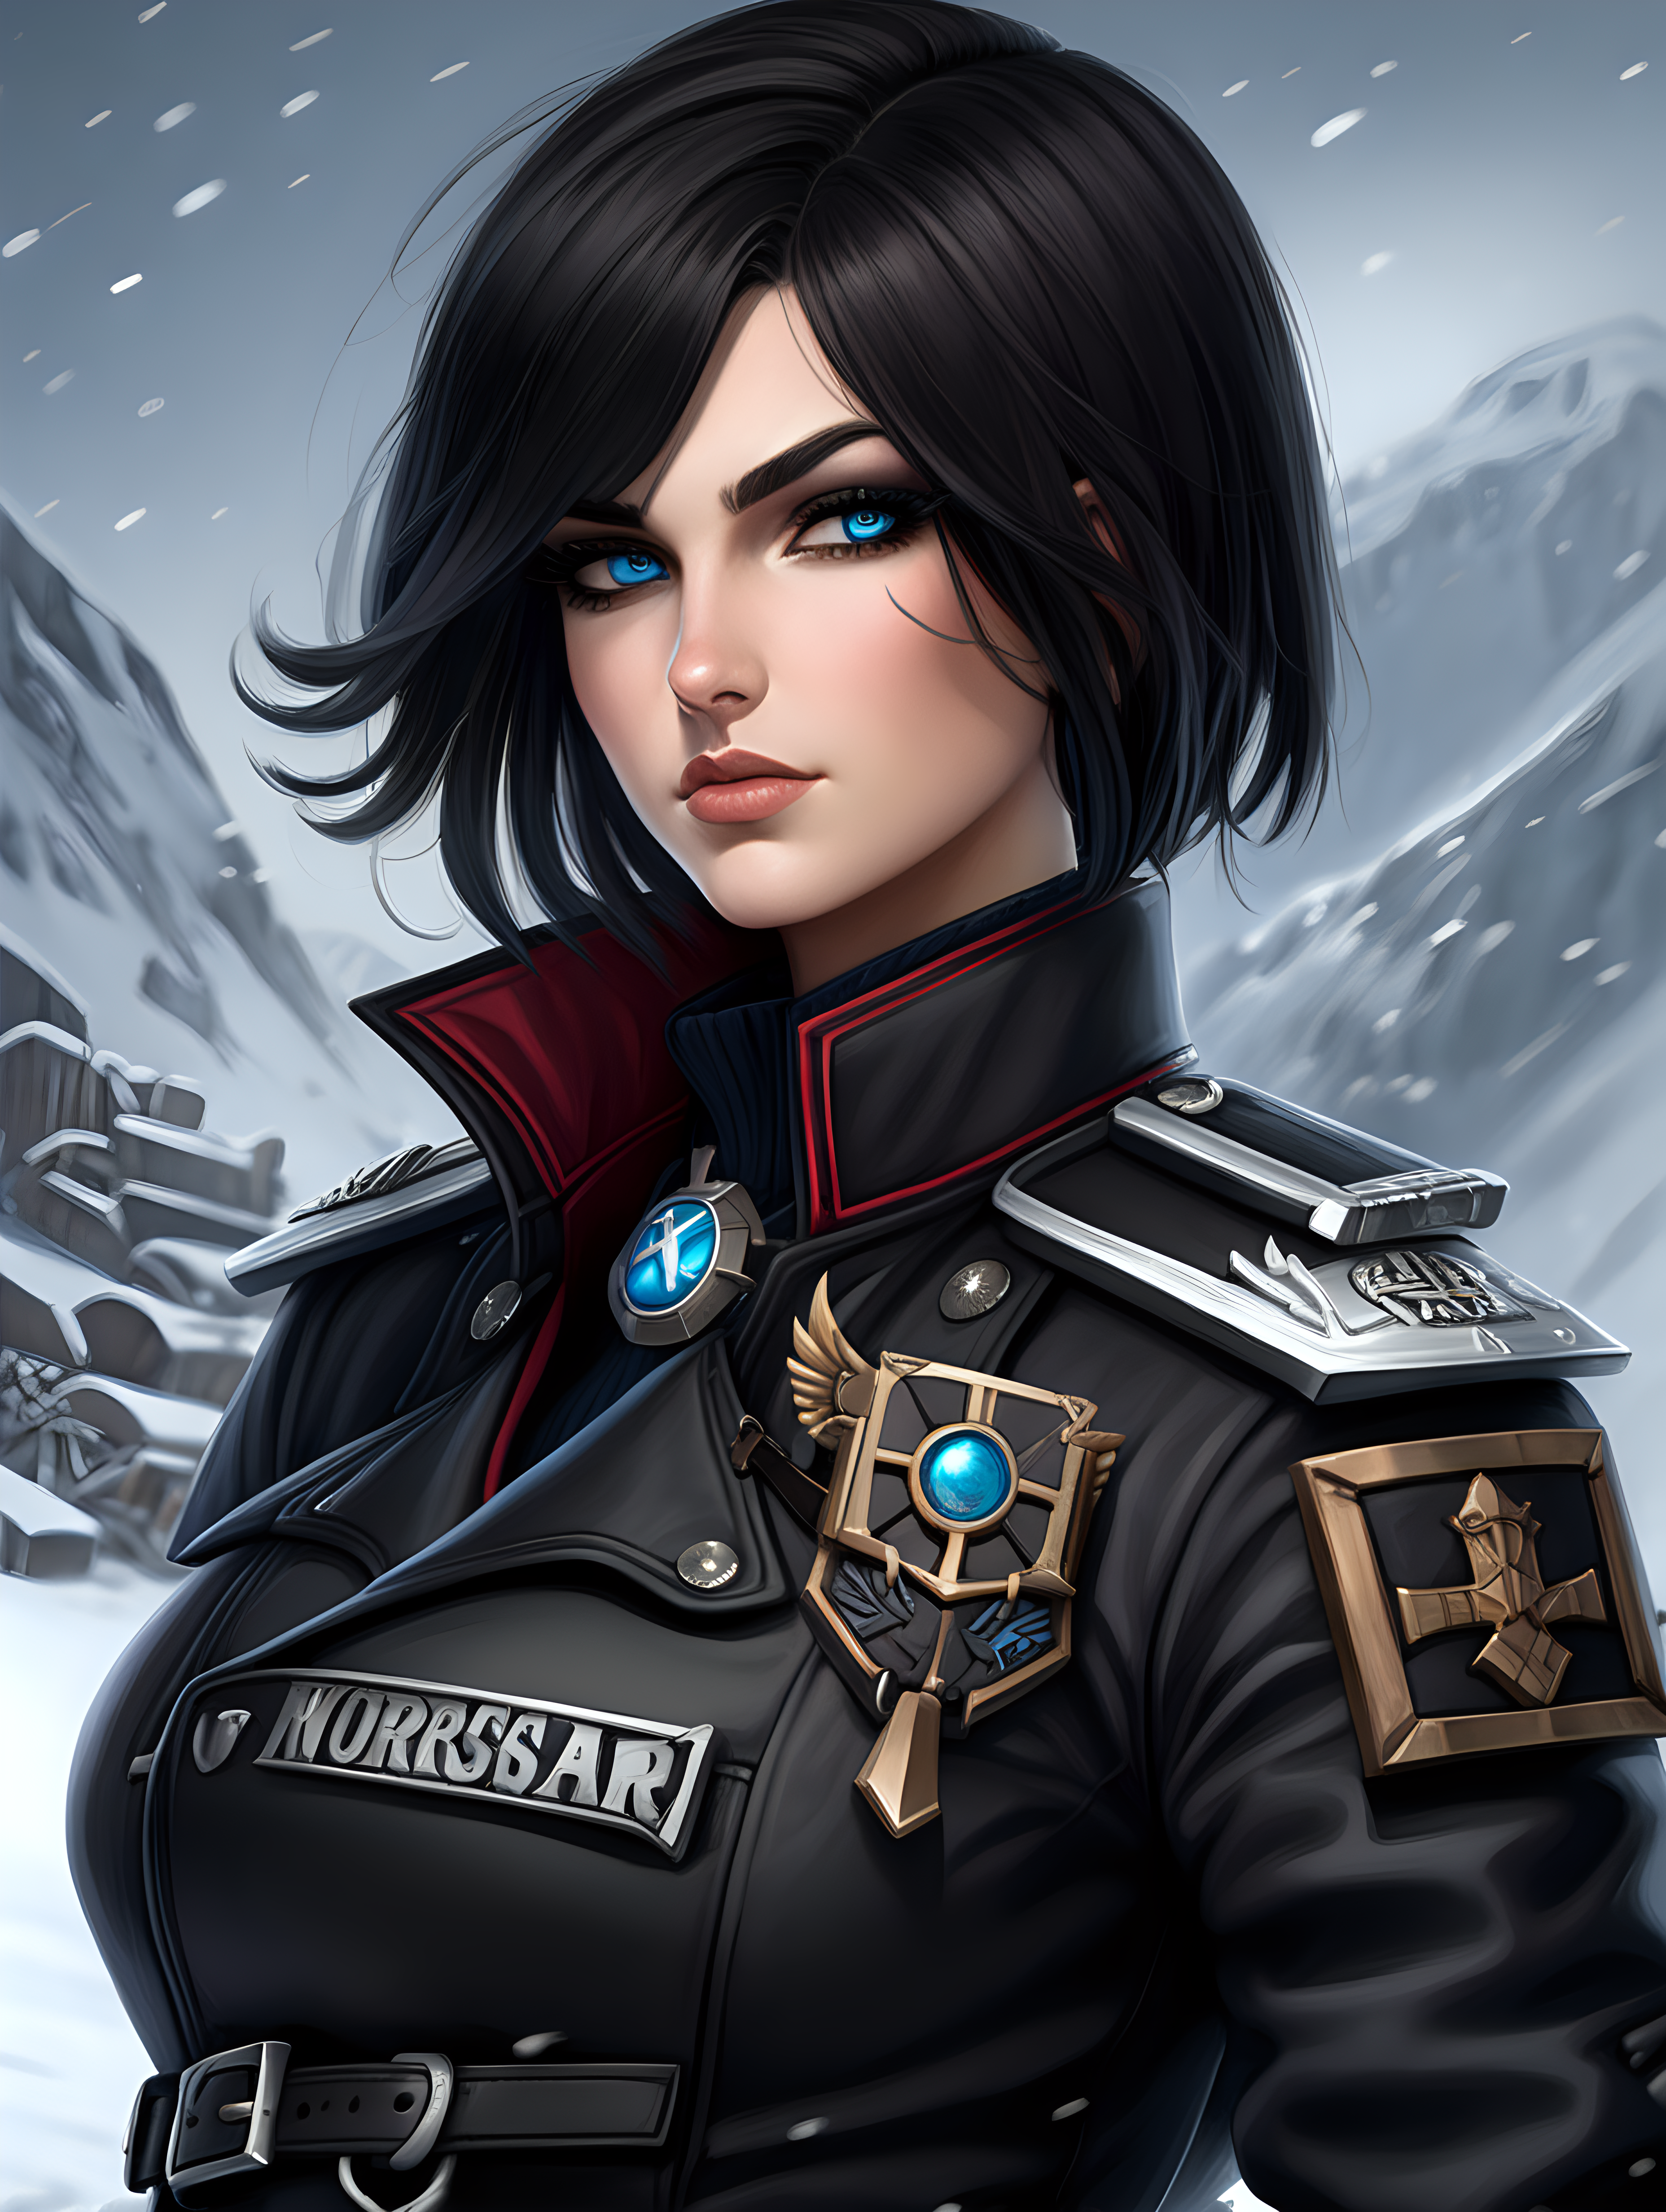 Warhammer 40K young busty Commissar woman. She has an hourglass shape. She has raven black hair. She has a very short hair style similar to what Maya, from Borderlands 2, has. Dark black uniform. Dark brown belt has a lot of pouches, grenades, and a black holster attached. Dark brown bandolier around waist. Her dark black uniform jacket fits perfectly and is closed up. She has a lot of eye shadow. Background scene is snowy trench line. She has icy blue eyes. Her uniform has some Norse runes on the collar and epaulettes. She is wearing warm clothes. --r 5